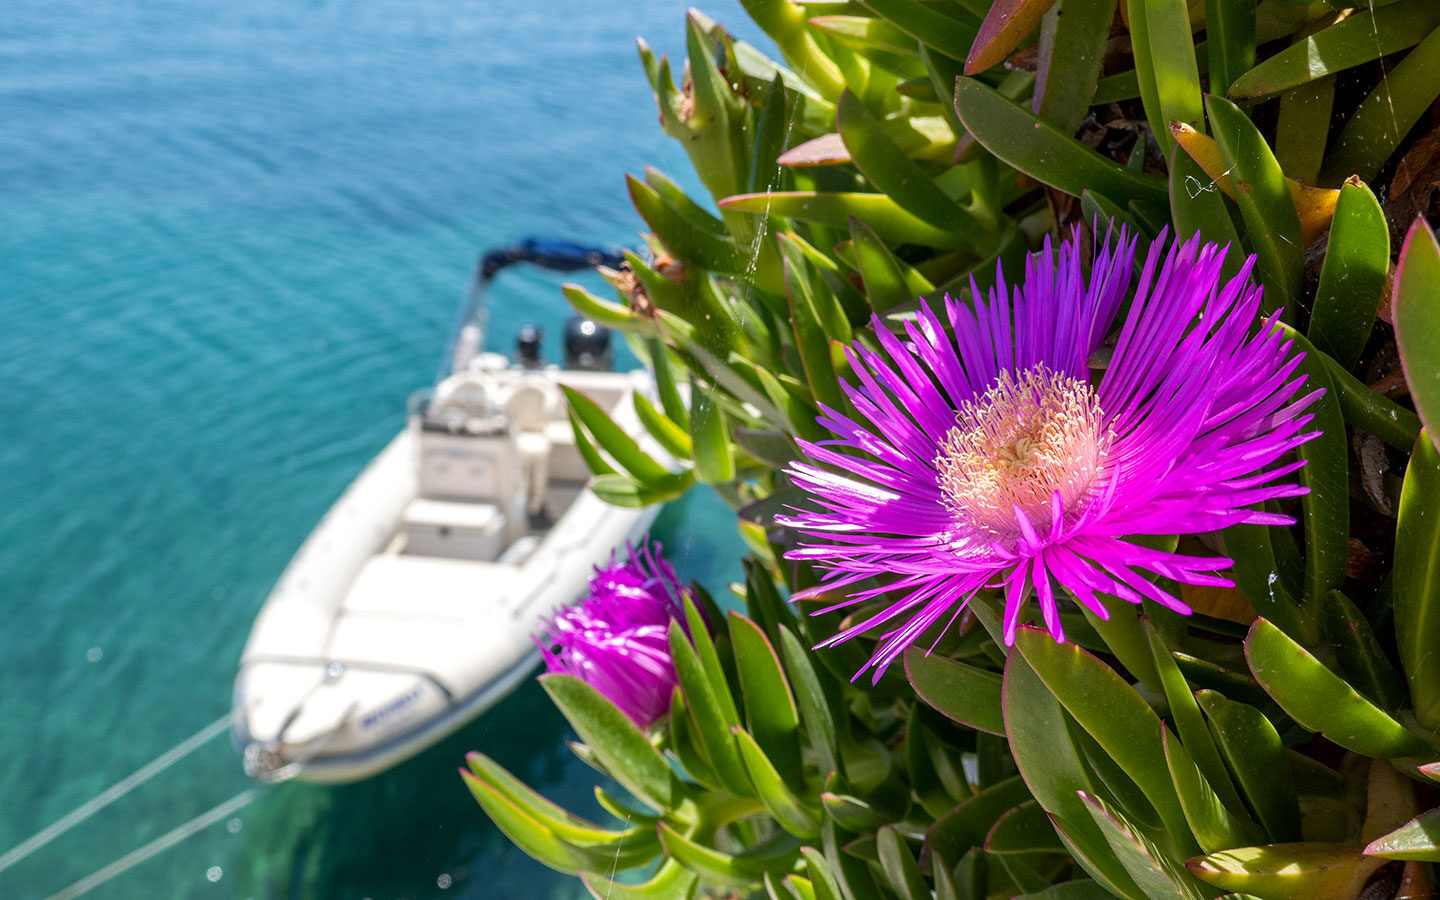 Spring flowers by the sea in Greece